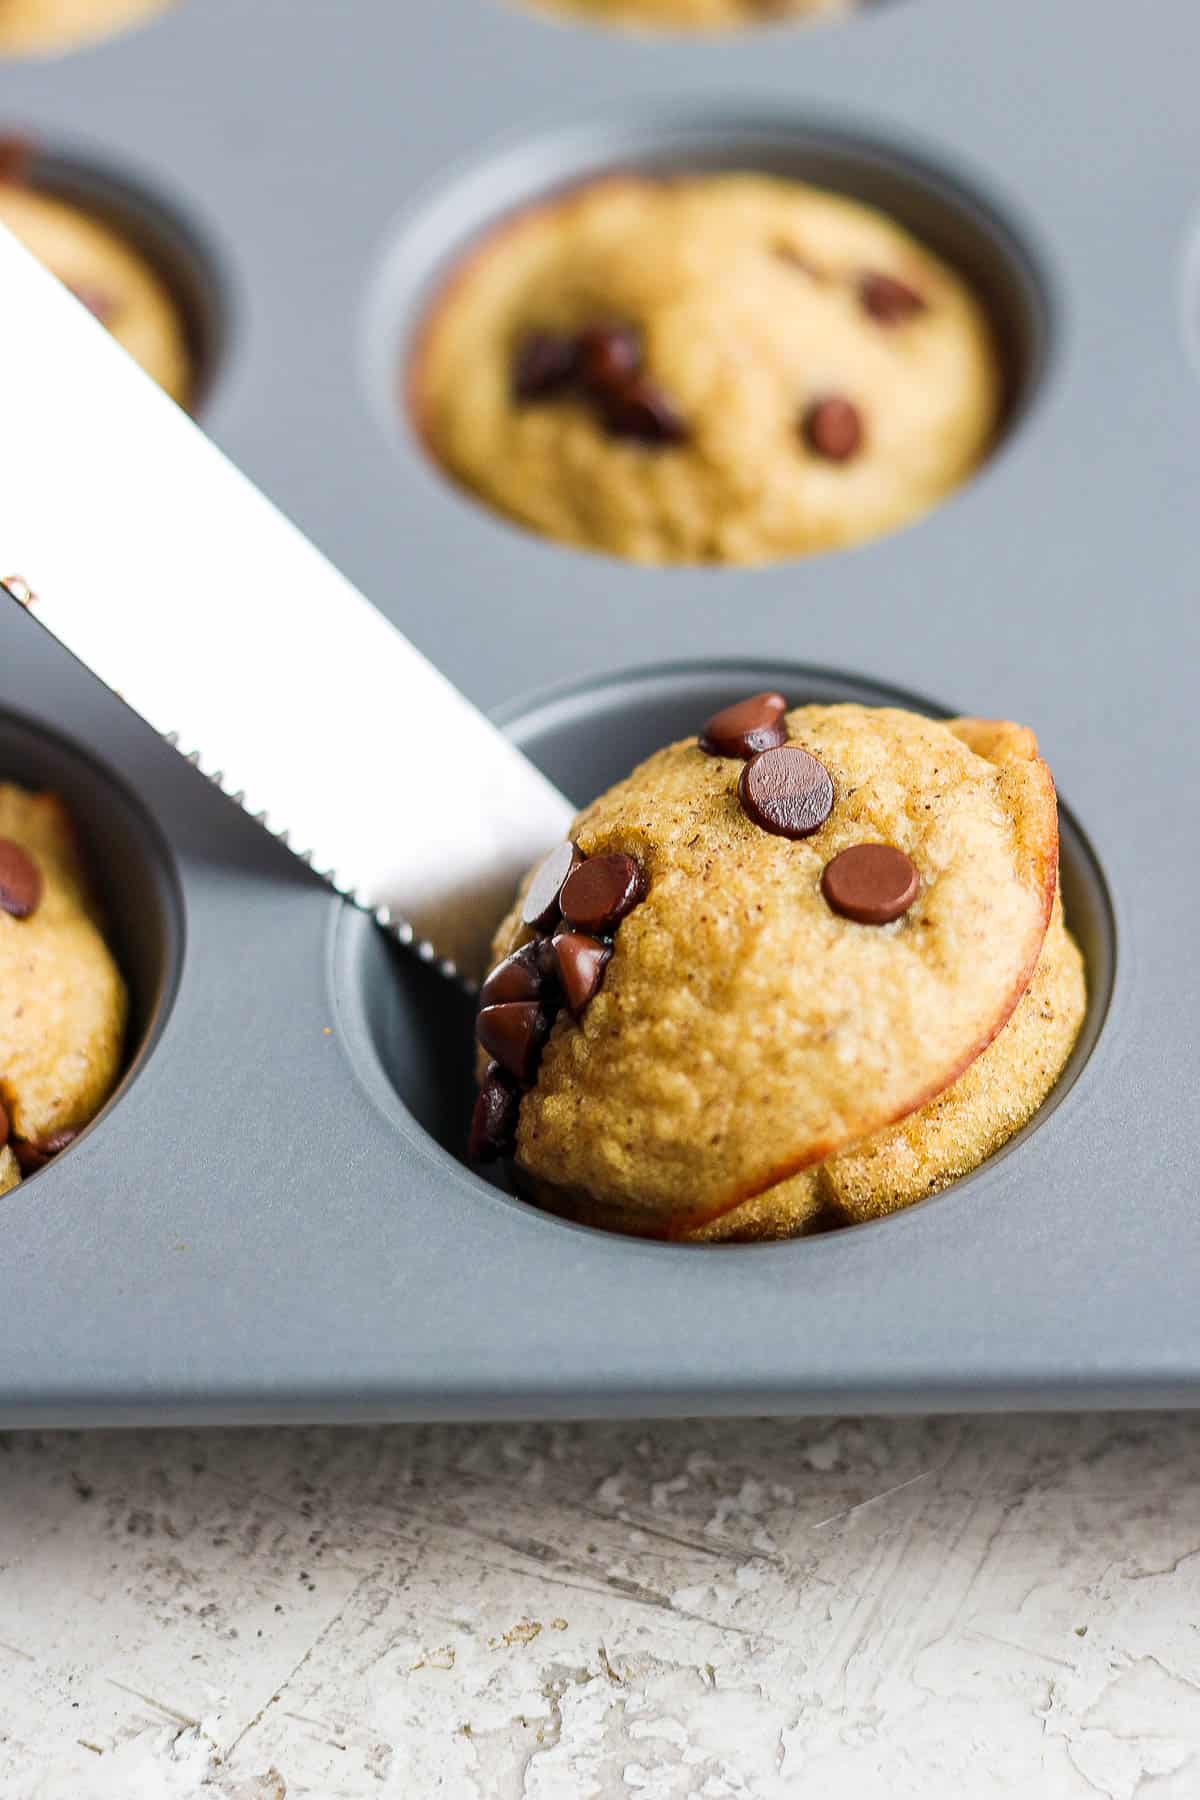 A butter knife popping the pancake bite out of the muffin tin.